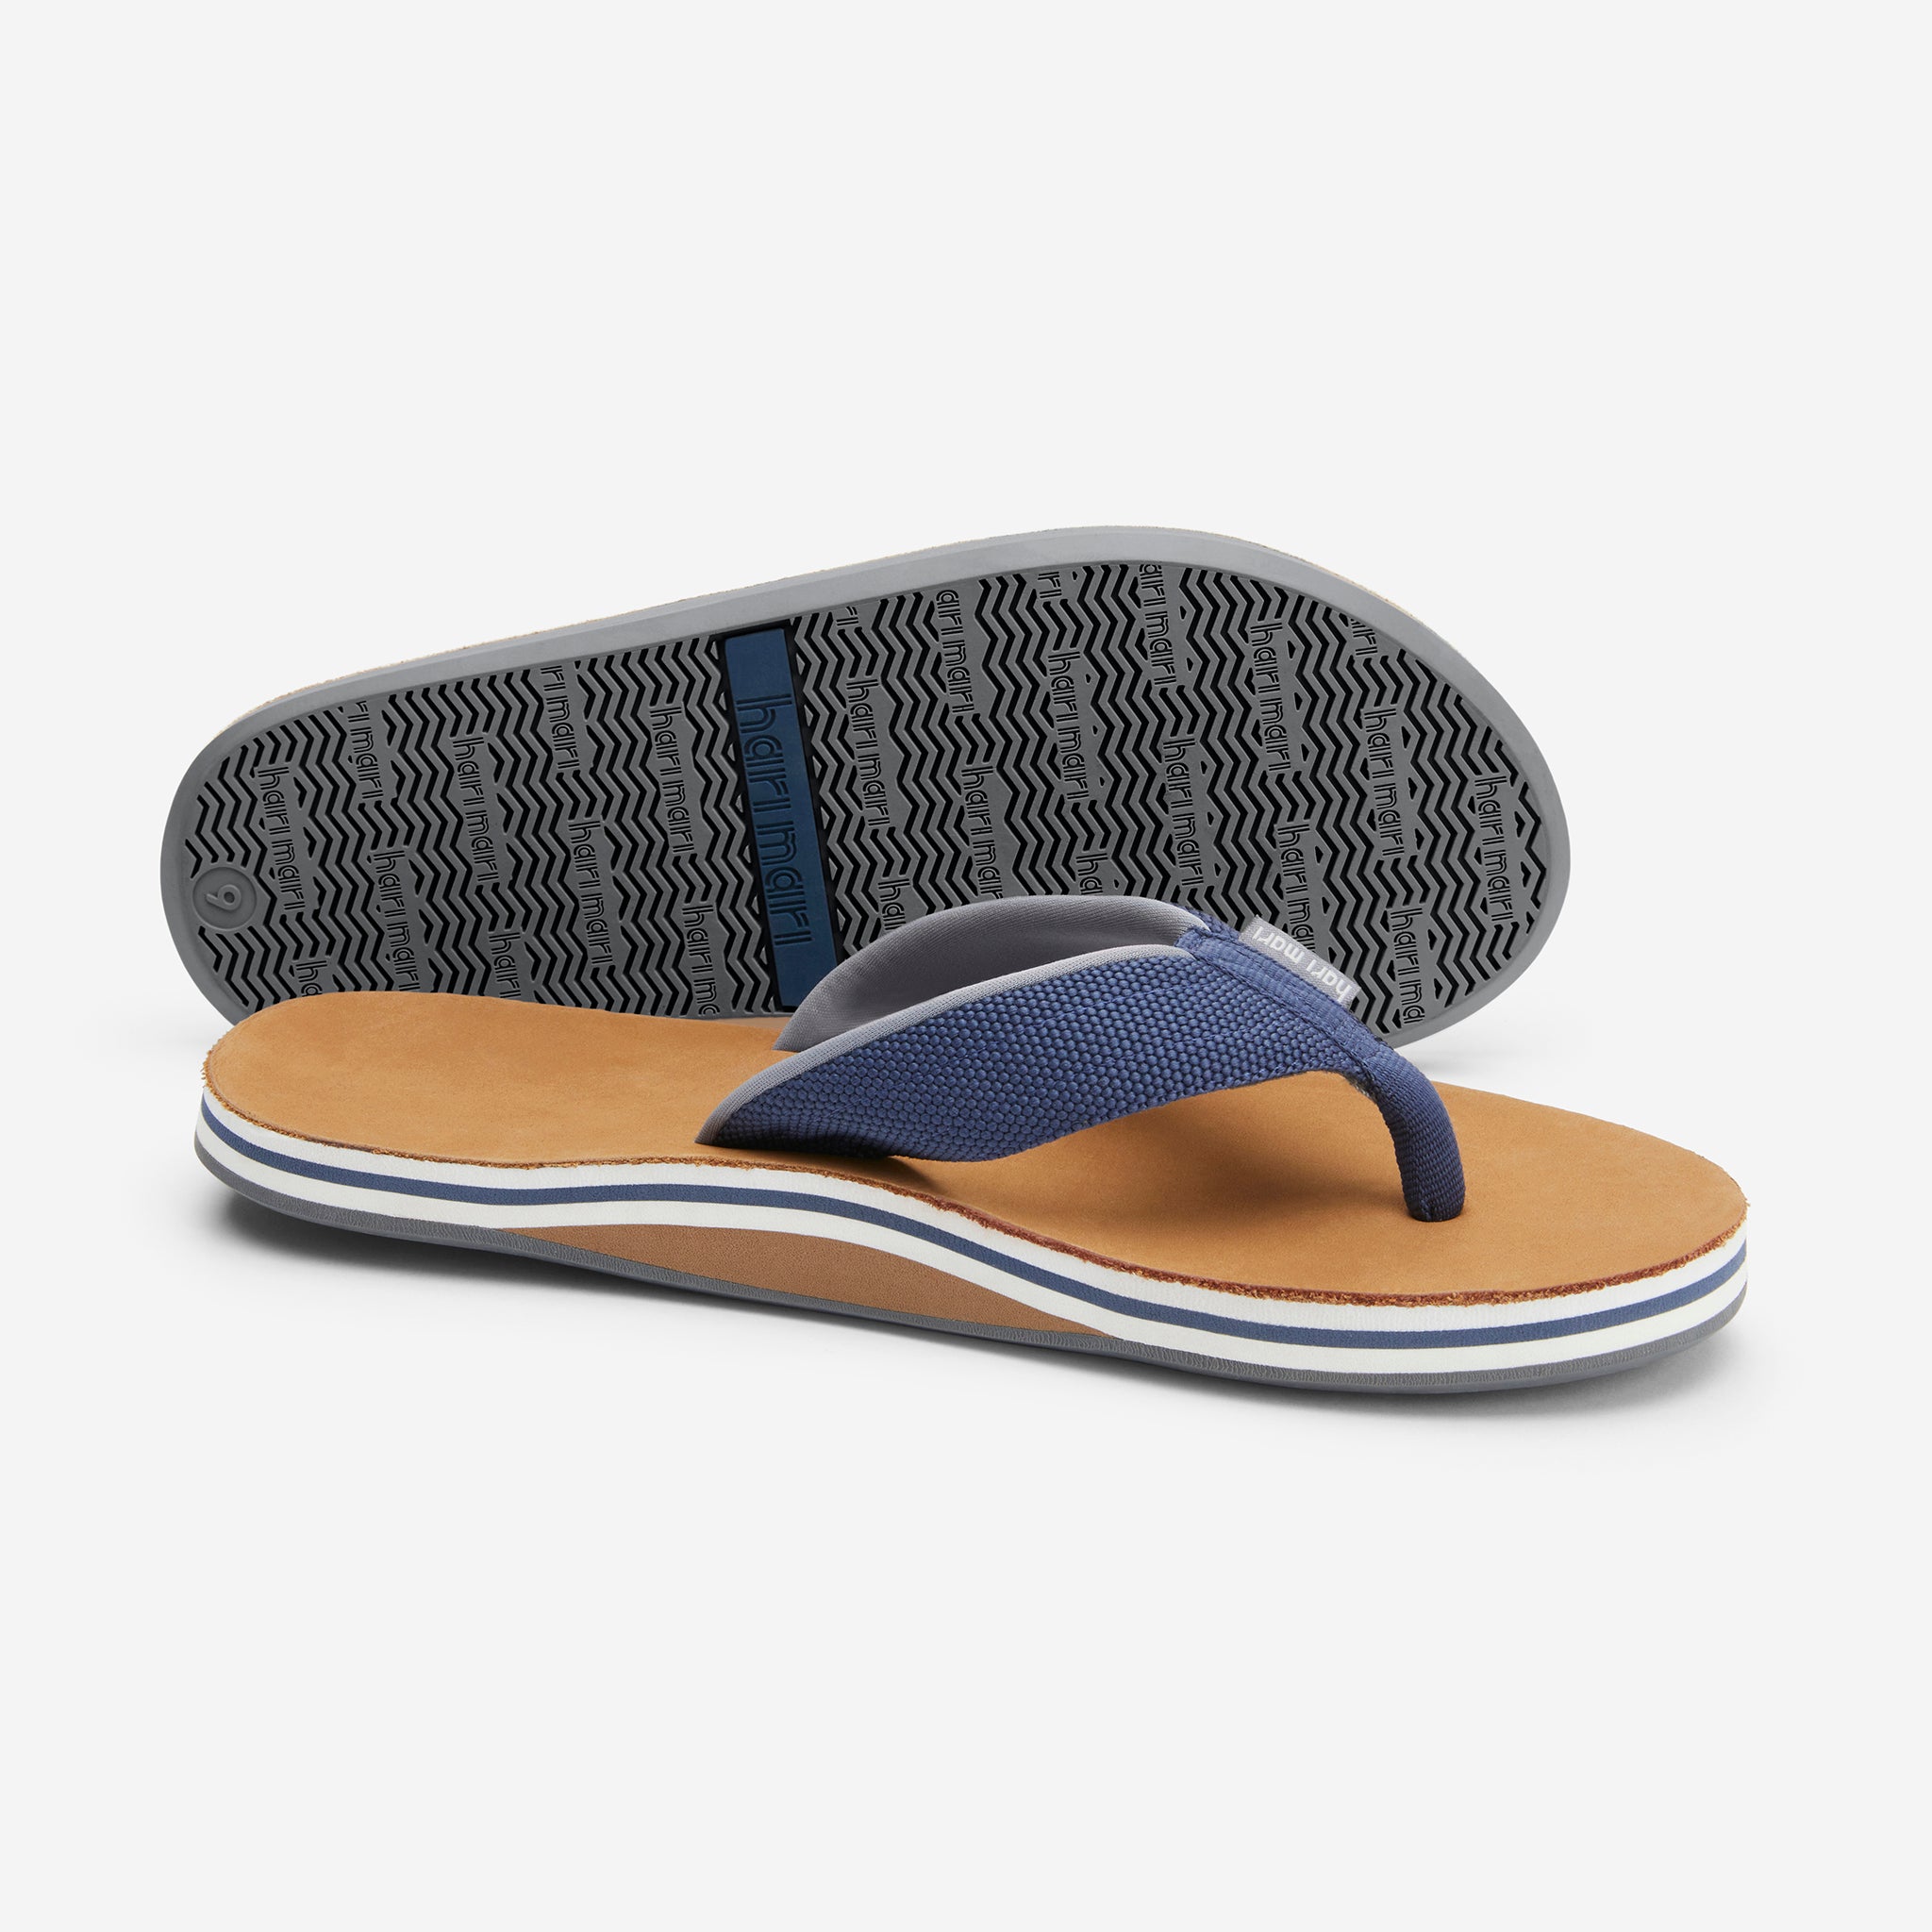 navy and gray leather flip flops from Hari Mari with blue midsole stripe - The Scouts